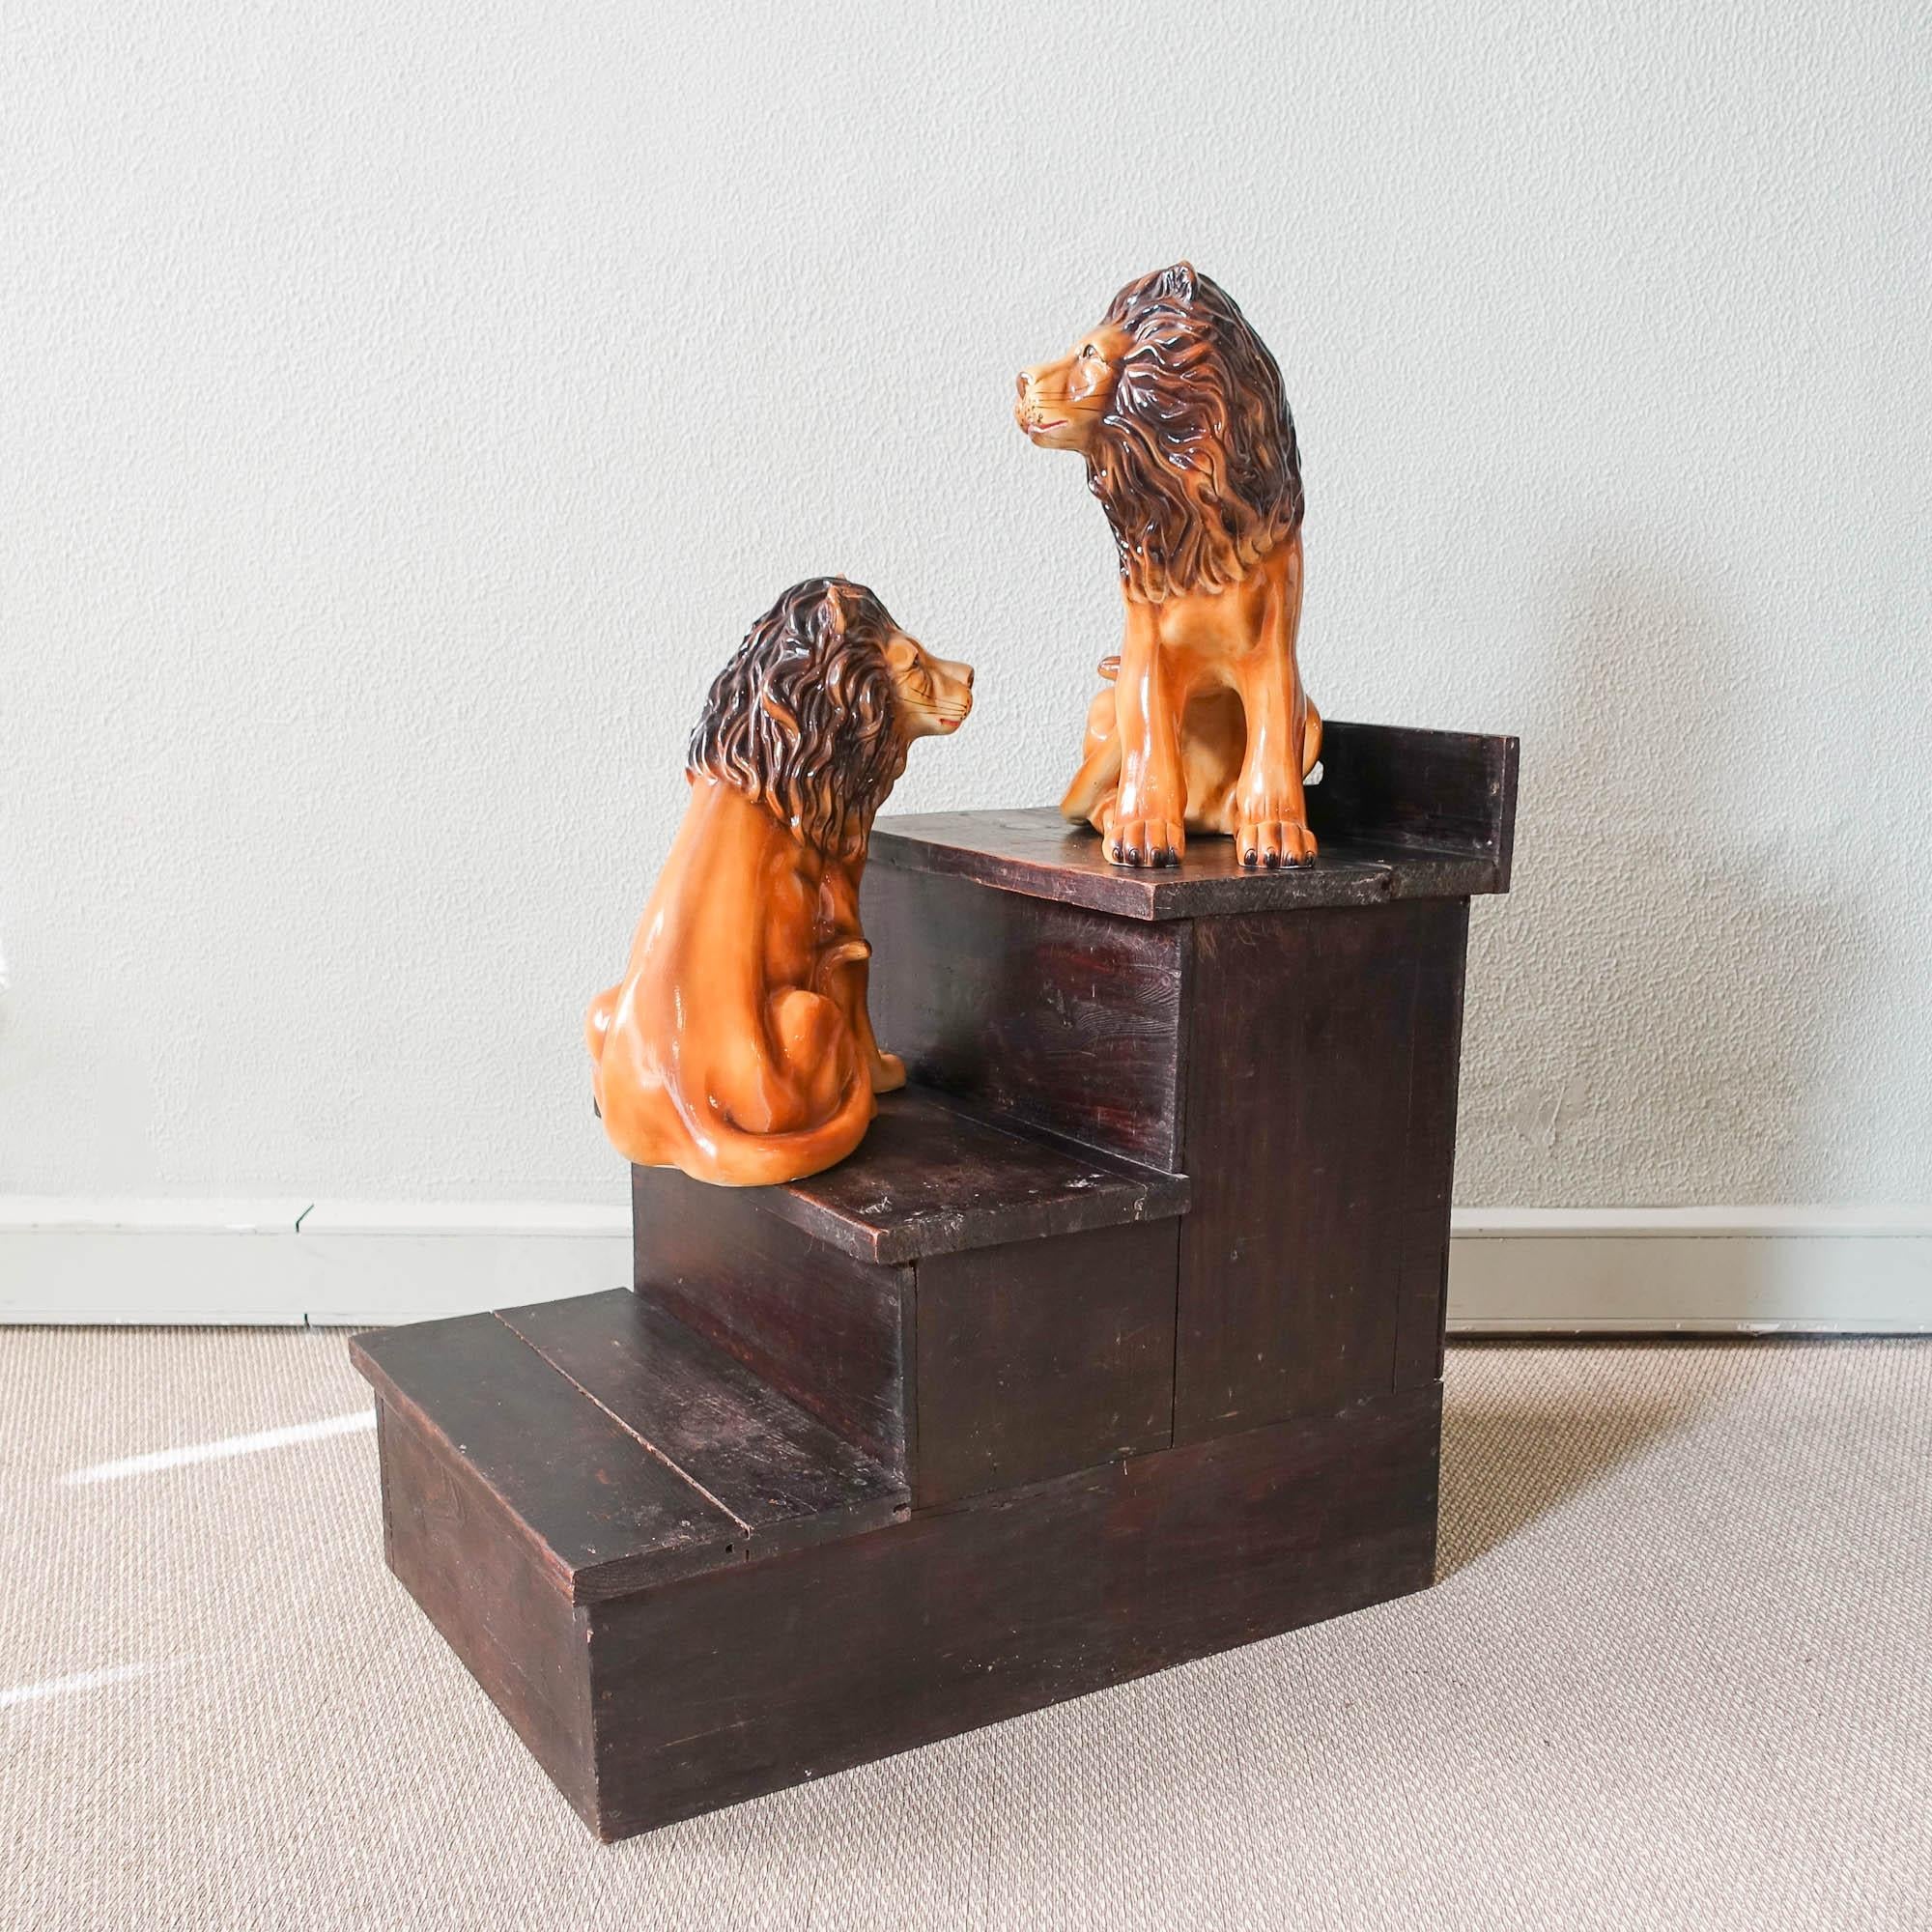 This pair of ceramic lions sculptures were produced in Portugal, during the 1970s. They are a decorative sculpture in ceramic, glazed and nice detailed. In original and good vintage condition, with no chips or cracks.